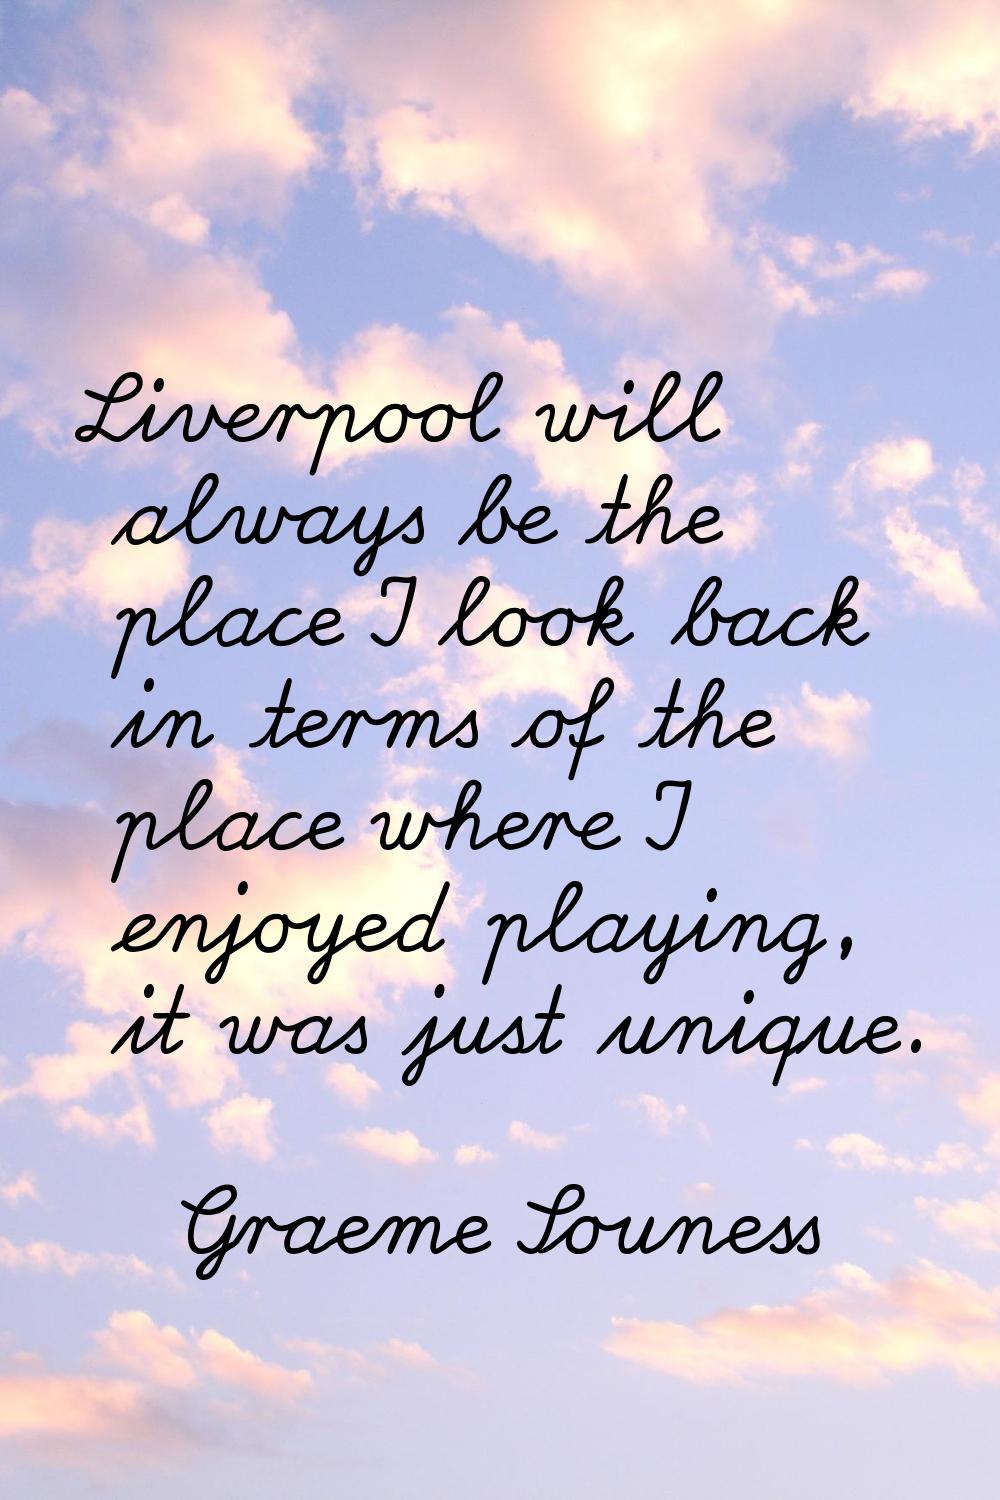 Liverpool will always be the place I look back in terms of the place where I enjoyed playing, it wa